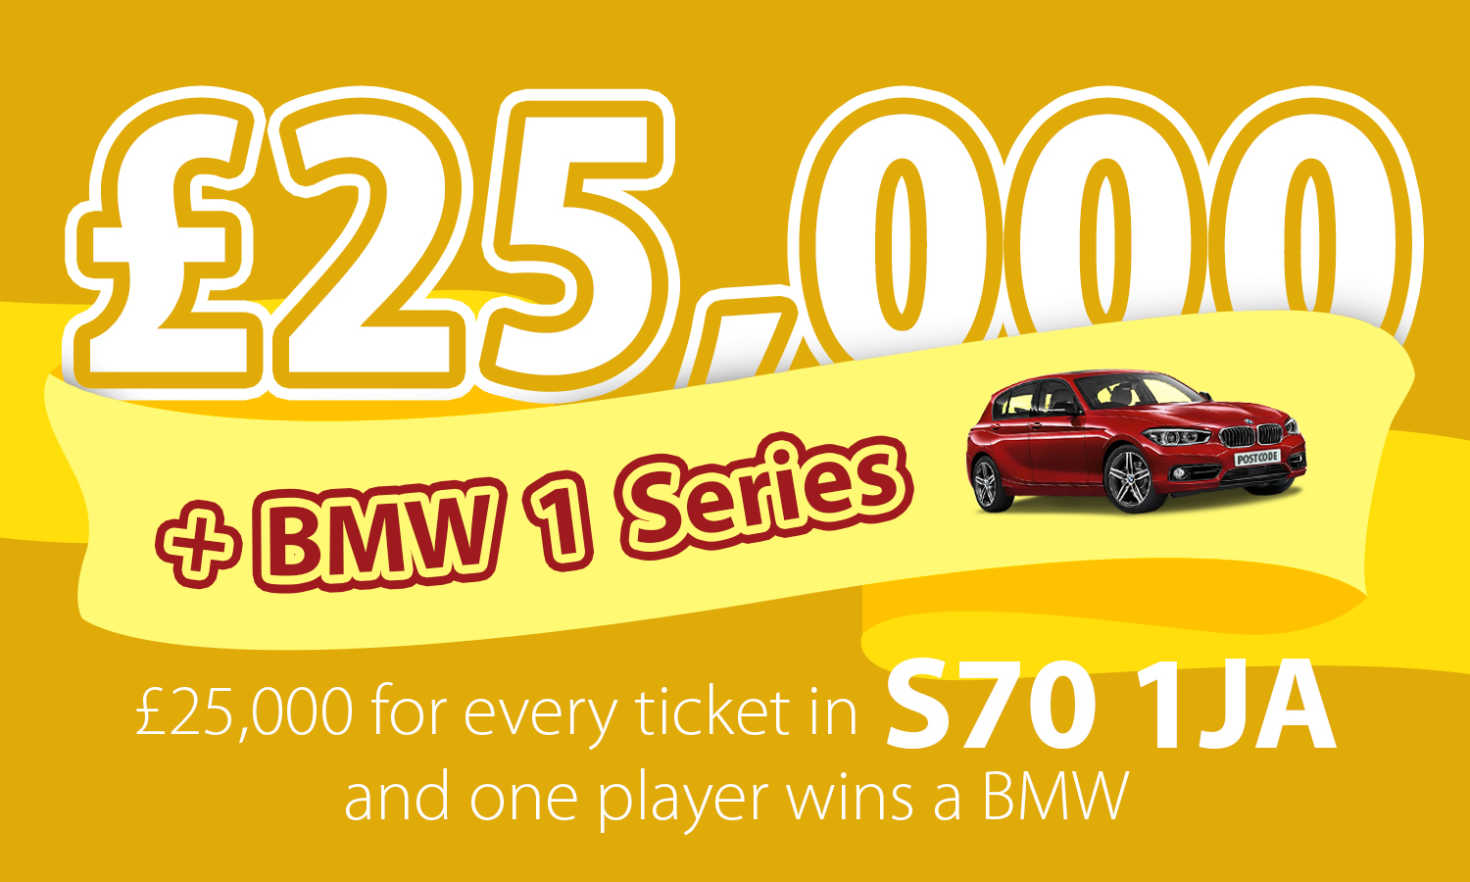 A lucky Barnsley player has won a fabulous £25,000 cash prize as well as a brand new BMW